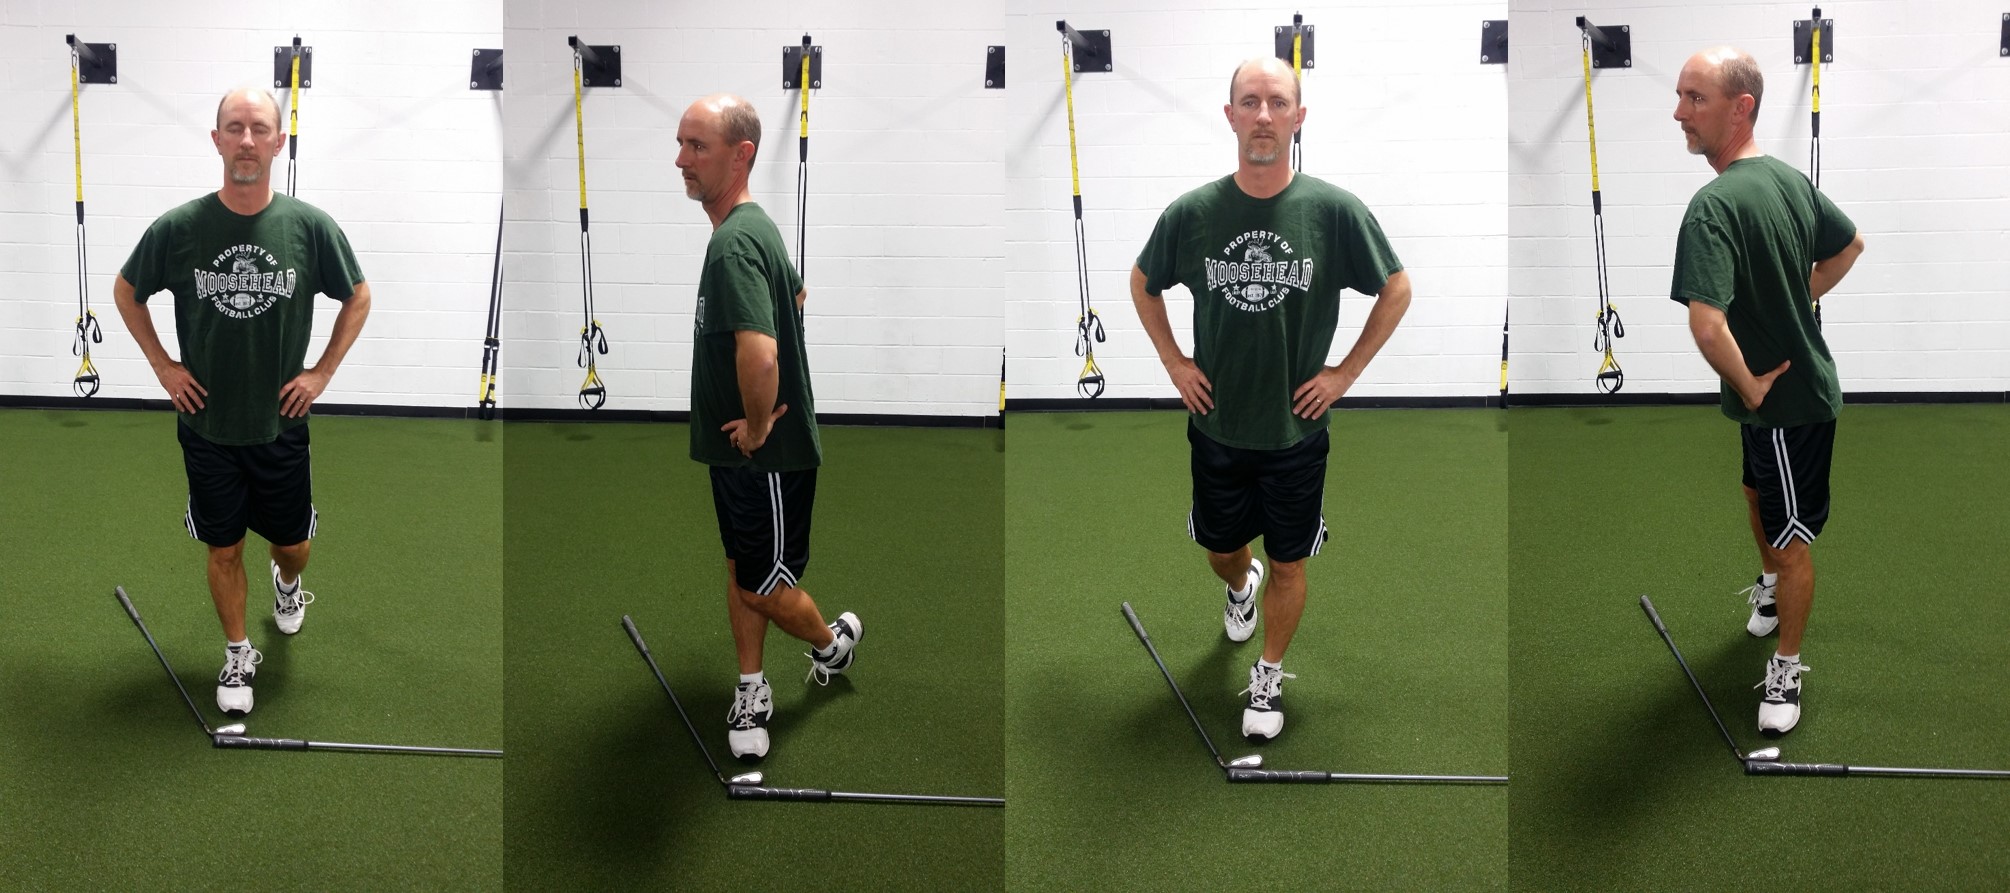 Is your body fit for better golf? Get screened to find out – GolfWRX